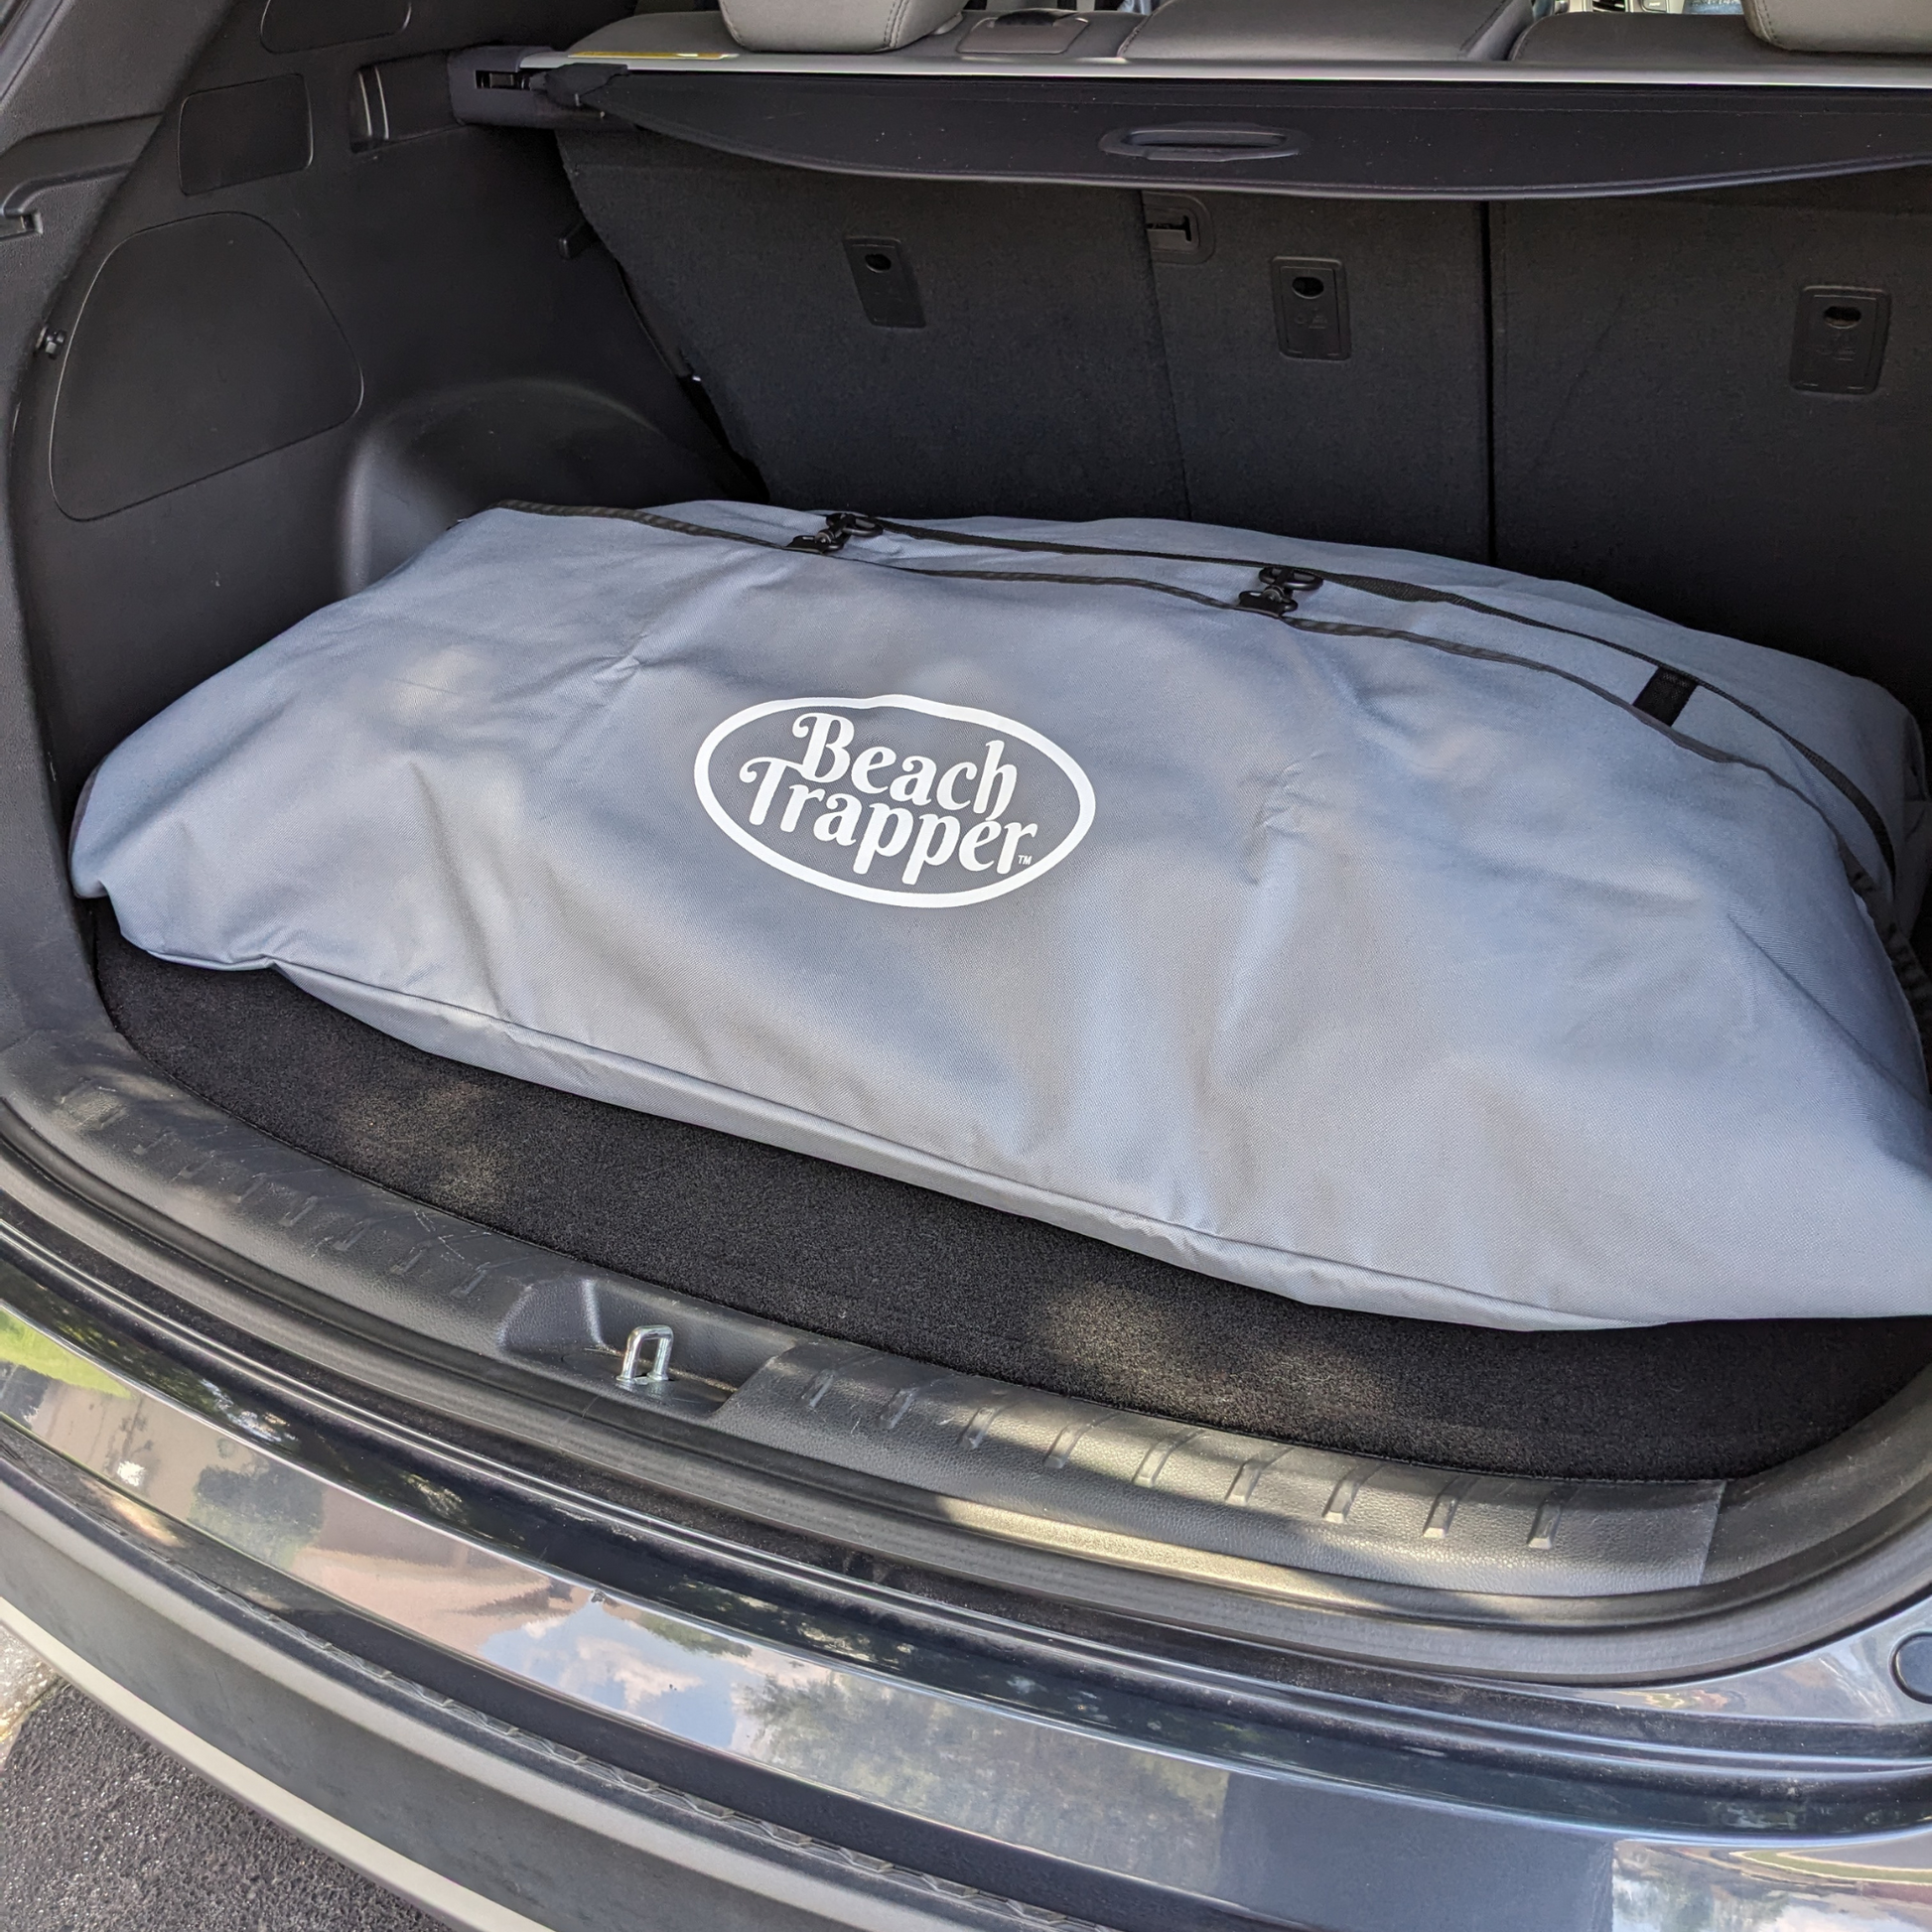 Car trunk bag for beach essentials, perfect for a day at the beach.